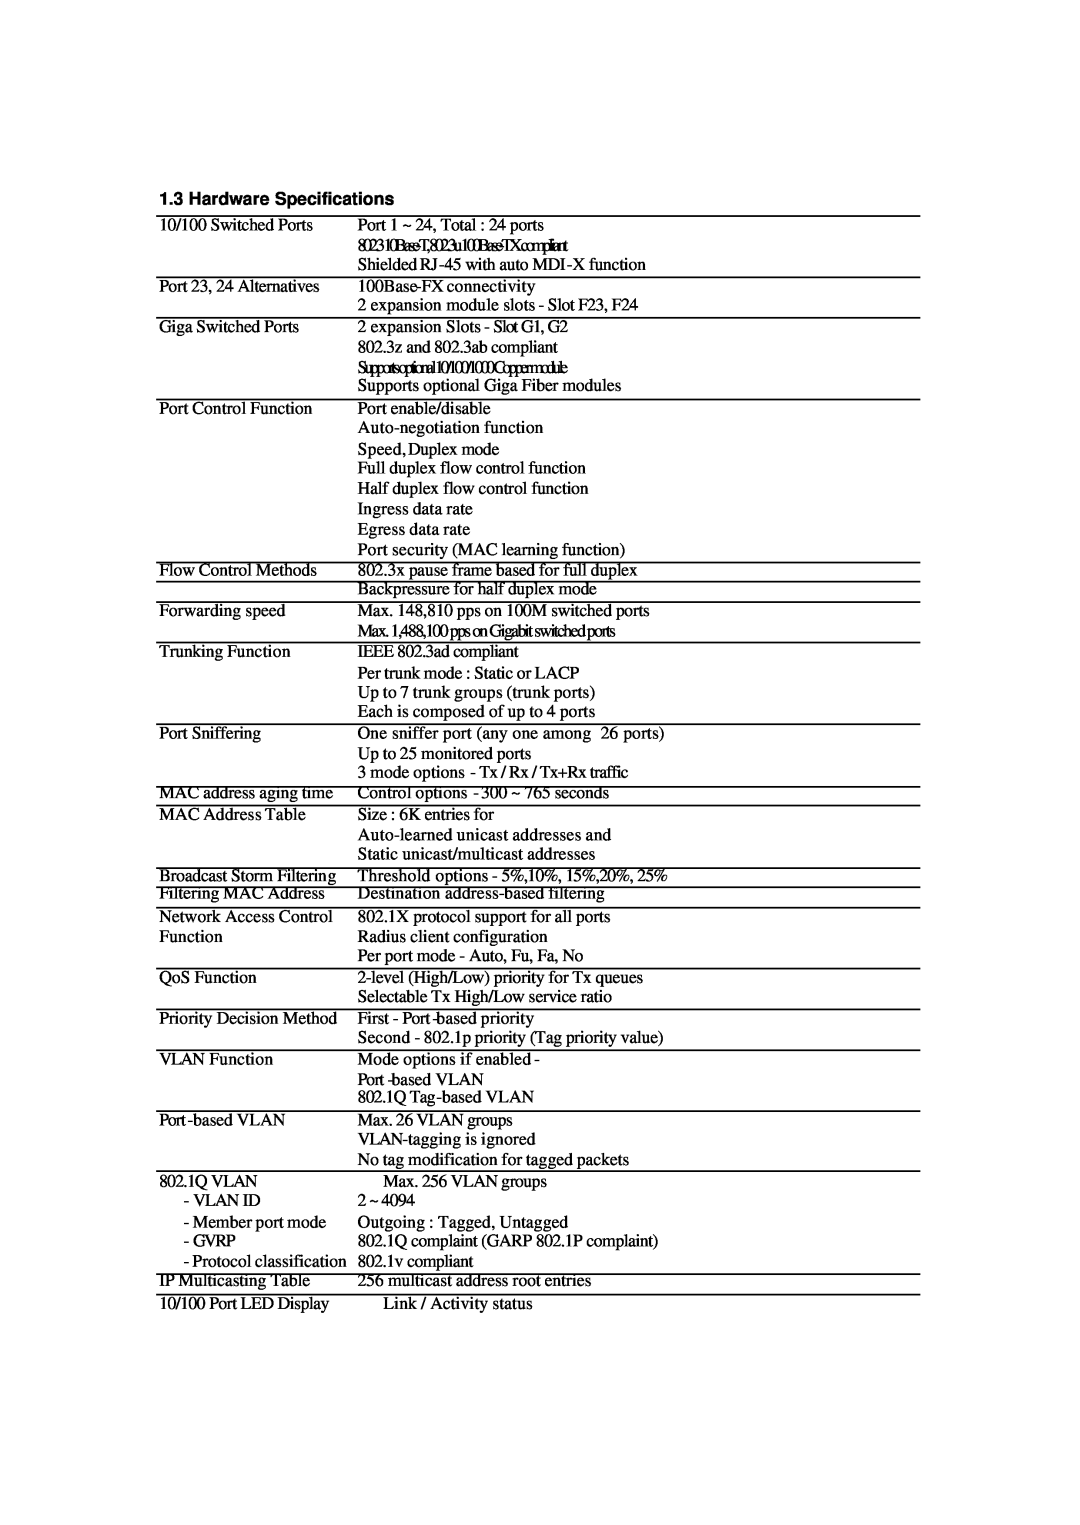 Xerox NS-2260 operation manual Hardware Specifications 